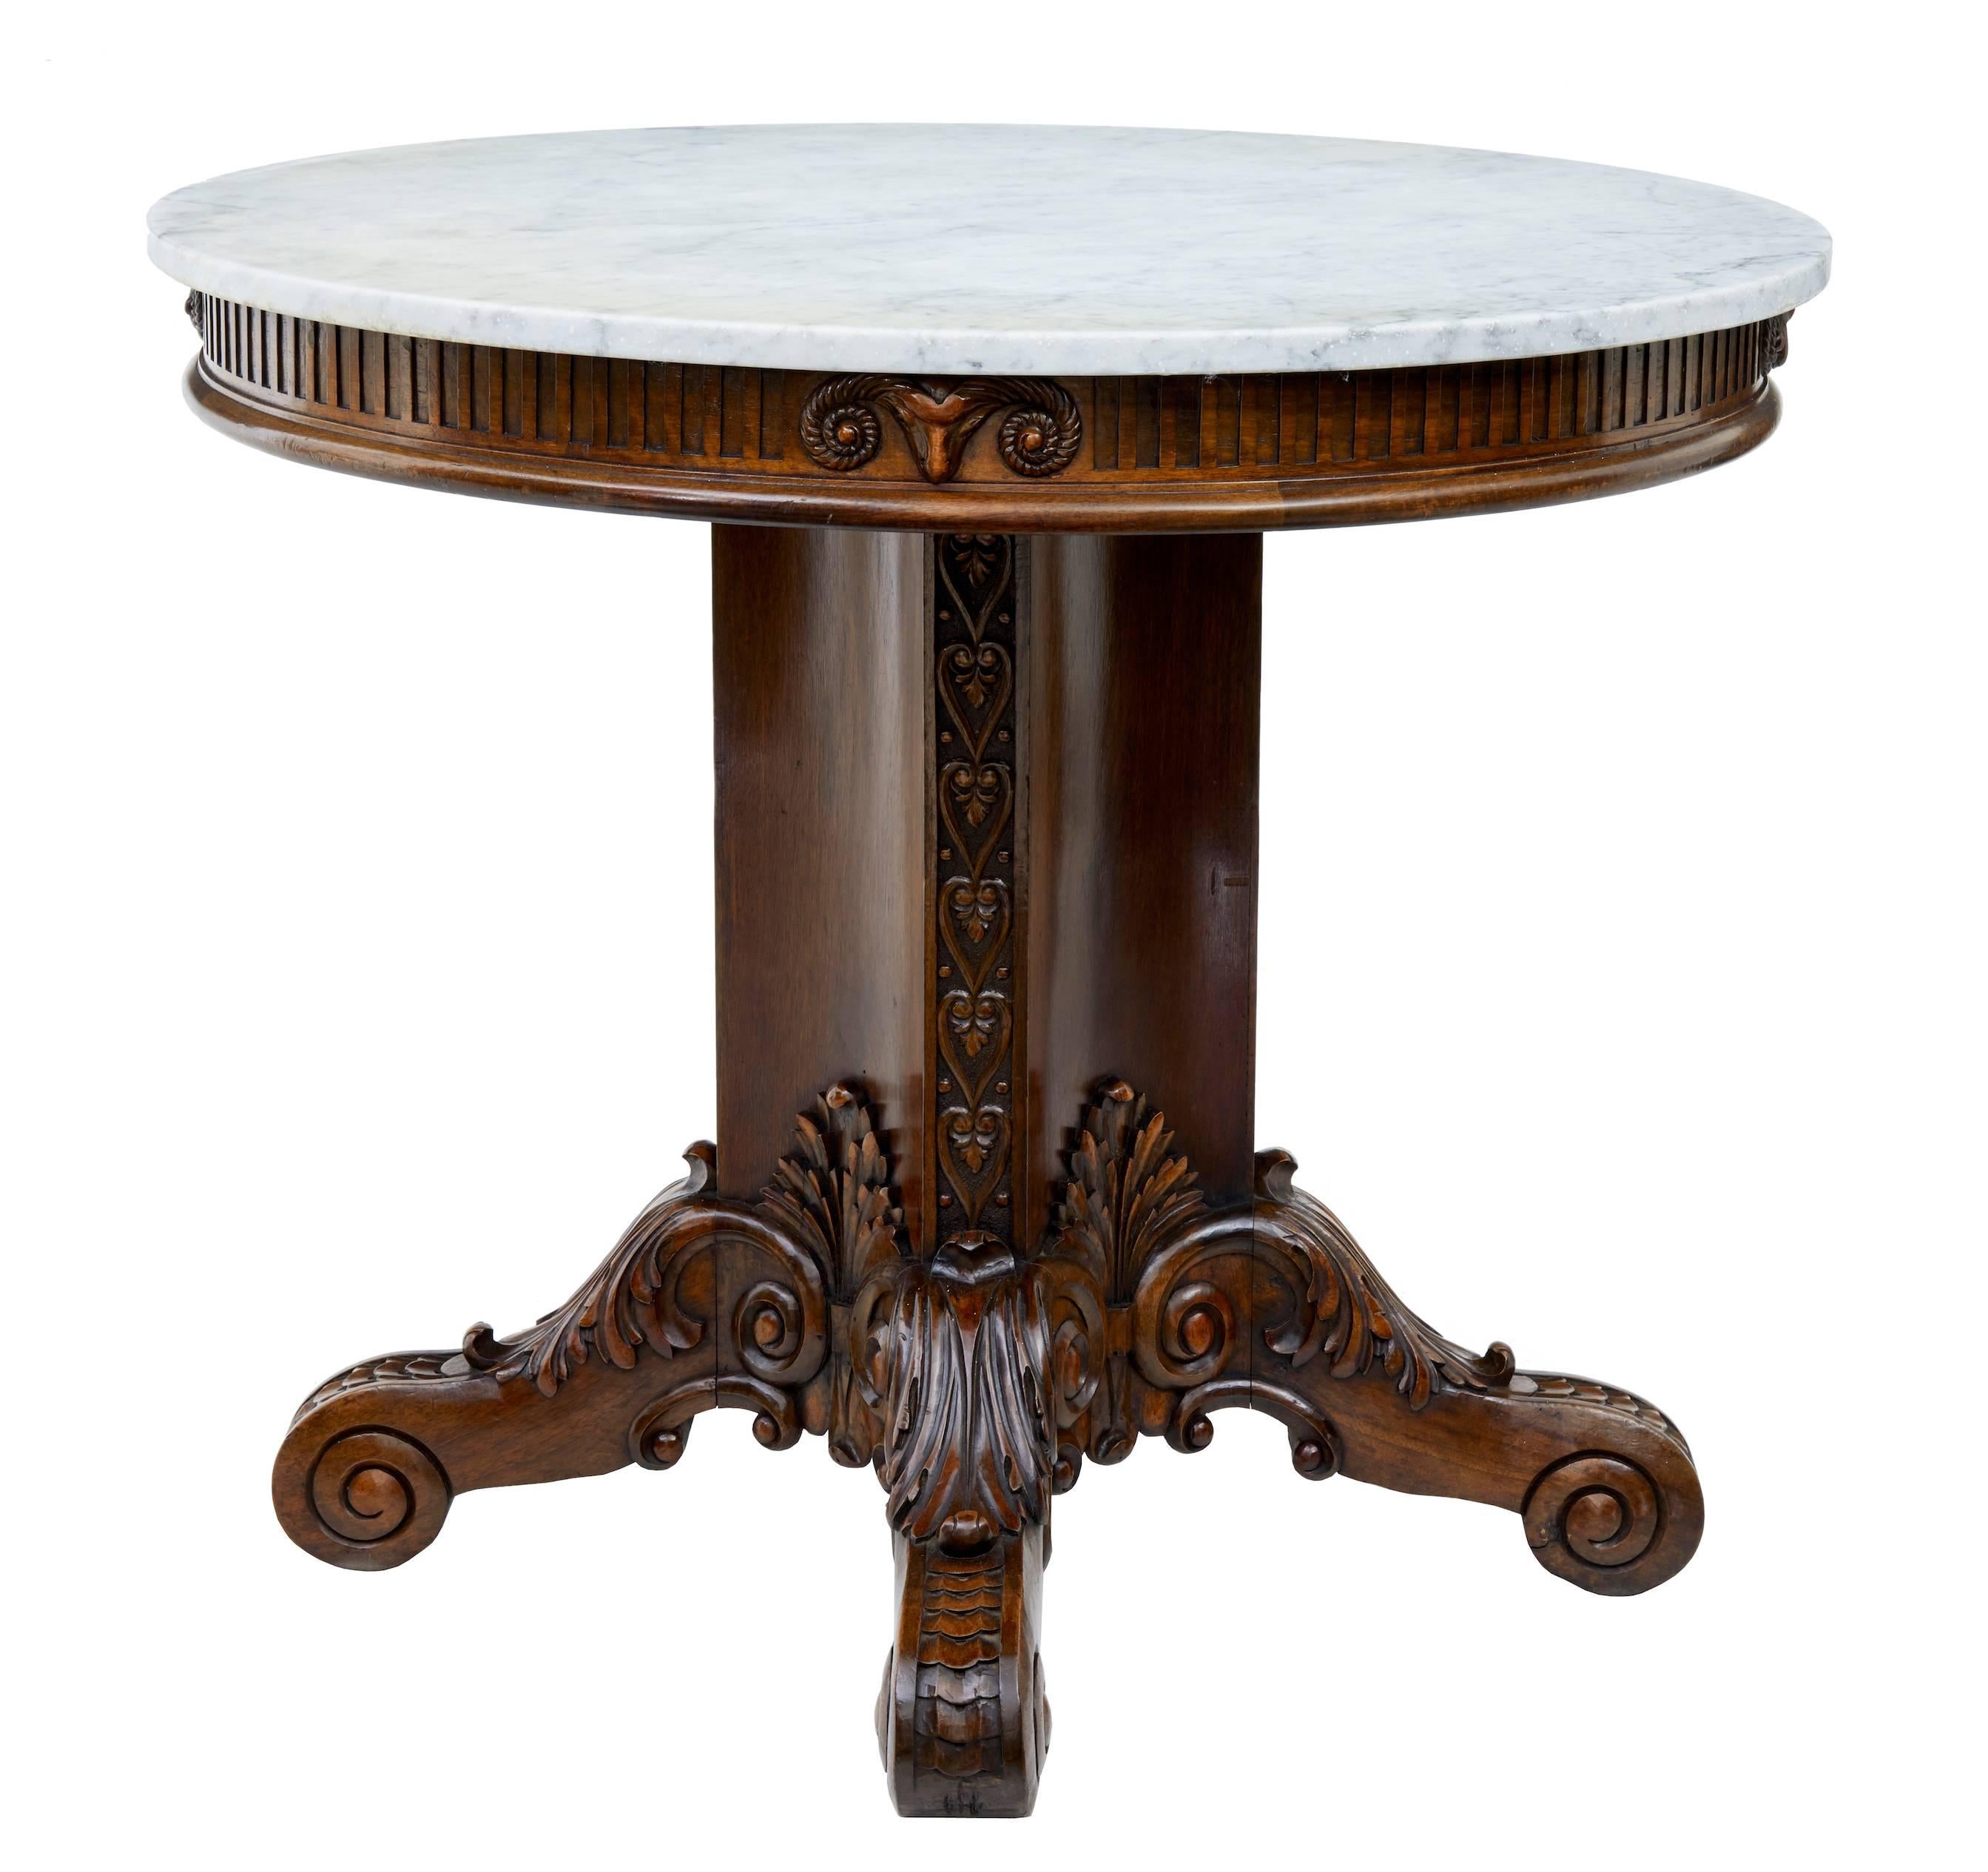 Beautifully carved walnut gueridon table, circa 1870.

Circular marble-top.
Superbly carved around the frieze with rams heads on the quarter.
Concaved shaped stem with heart carving.
Standing on four scrolled legs with acanthus leaf